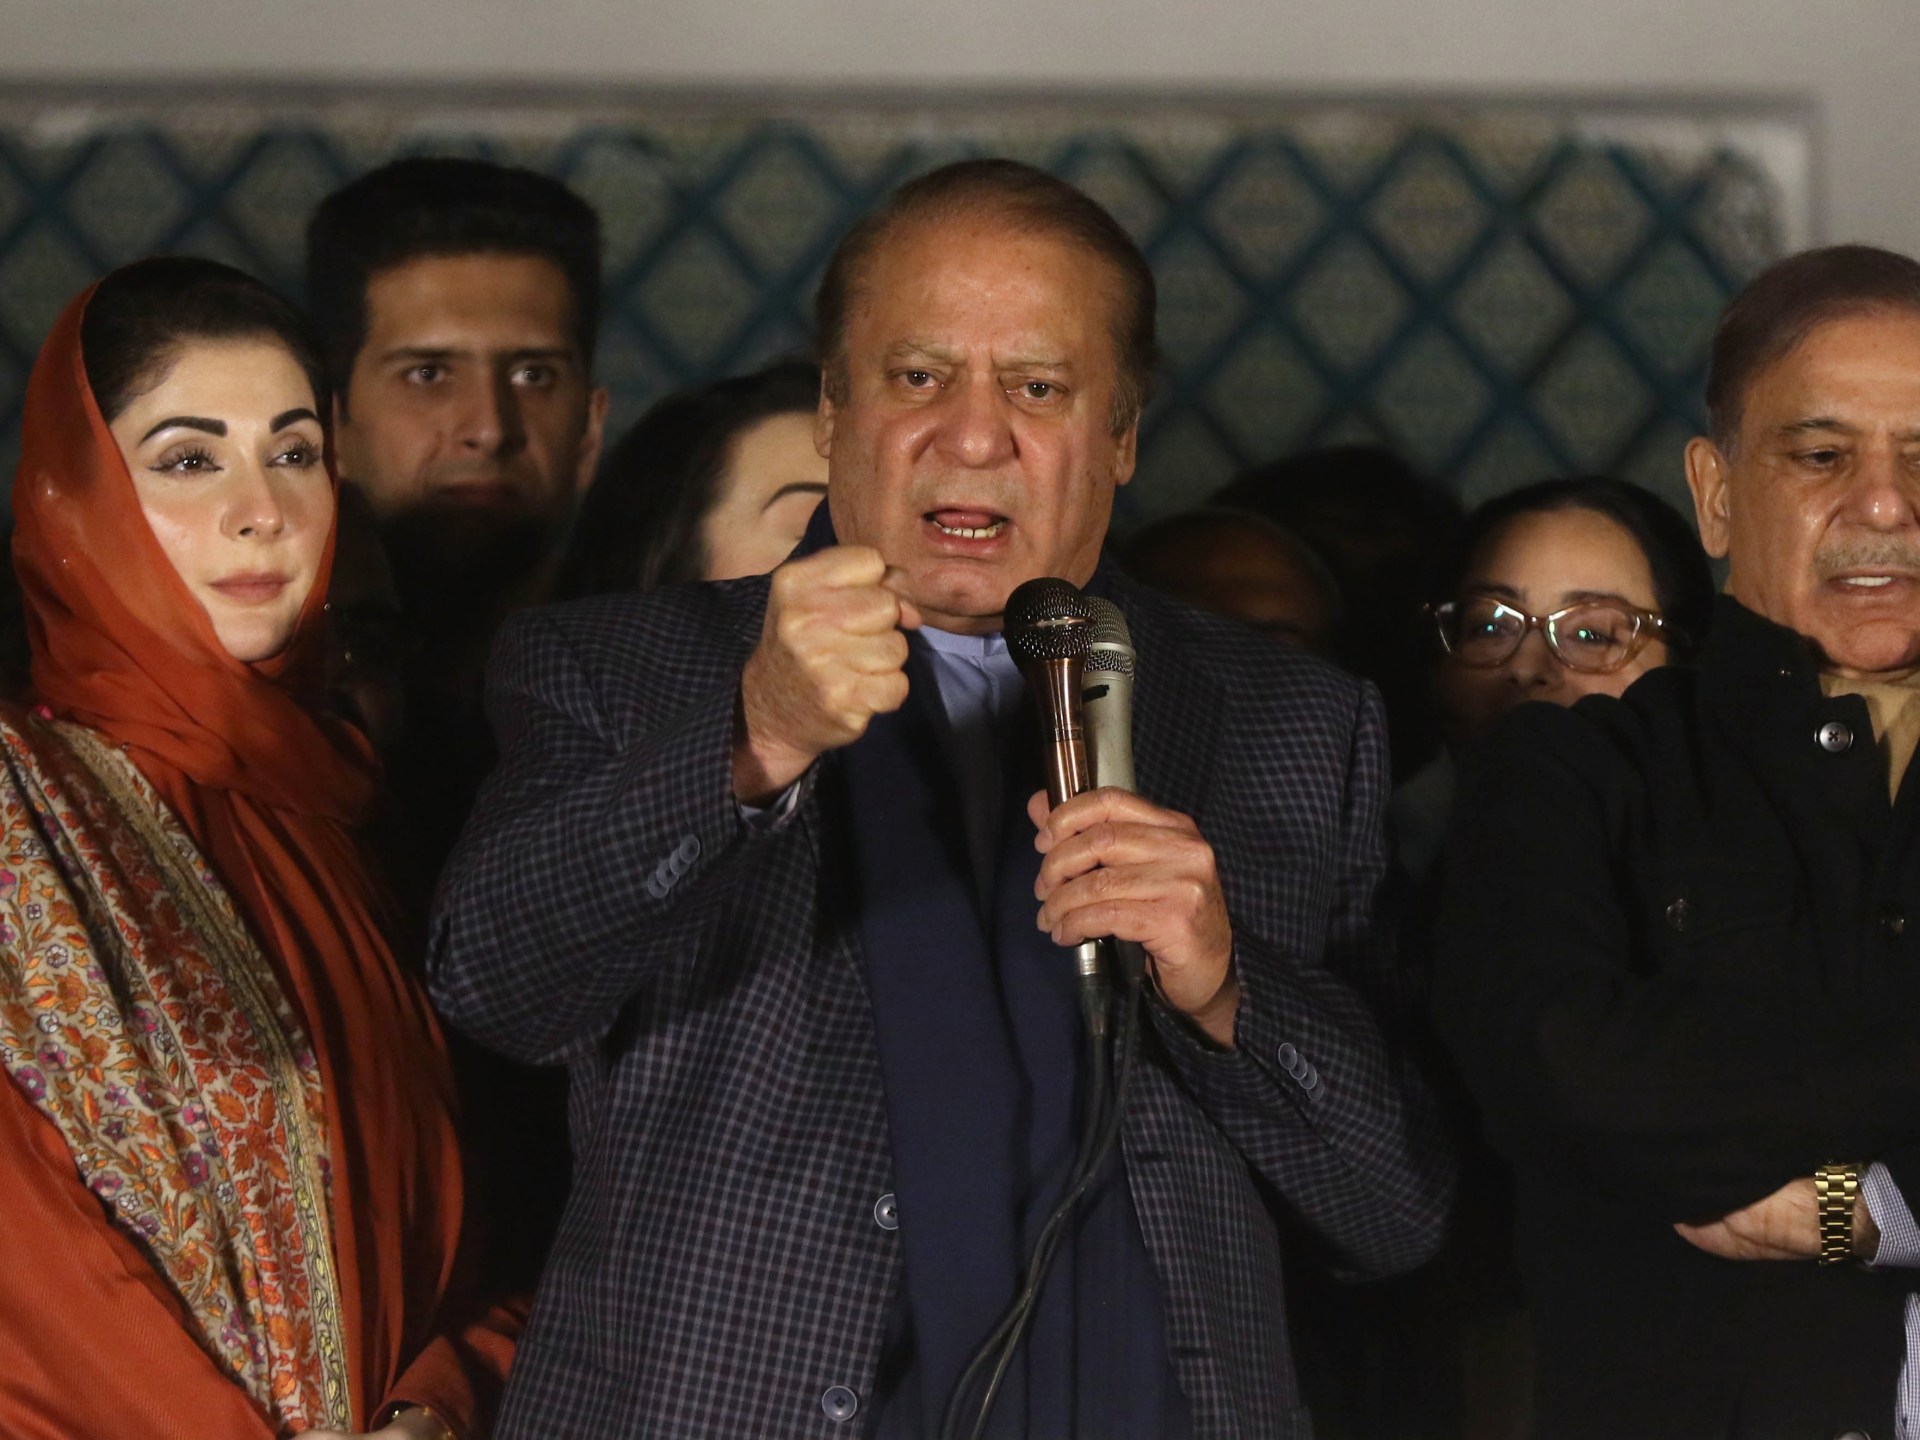 Army-backed Nawaz Sharif fails to win Pakistan election. What went wrong?